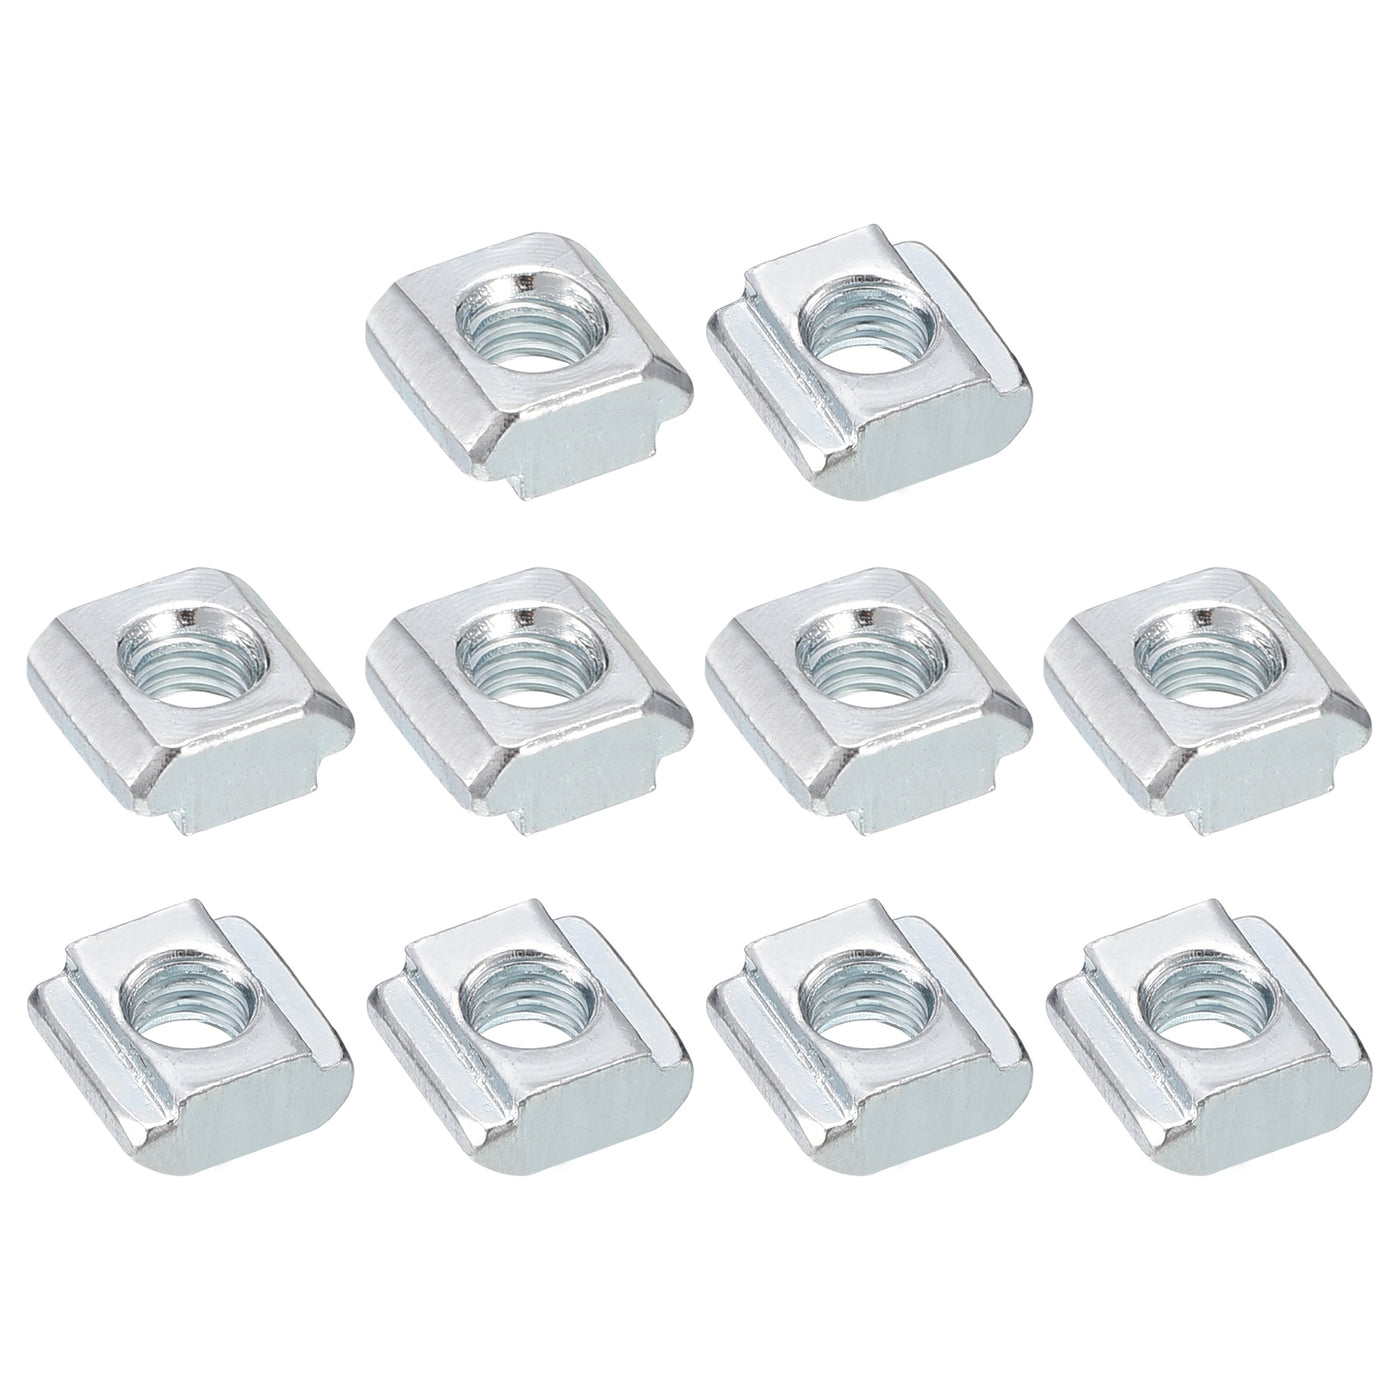 uxcell Uxcell T Nuts, 100pcs - Nickel Plated Carbon Steel T Slot Bolts, 2020 Series M5 Hammer Head Fastener, Sliding T Nuts for Aluminum Extrusion Profile (Silver)